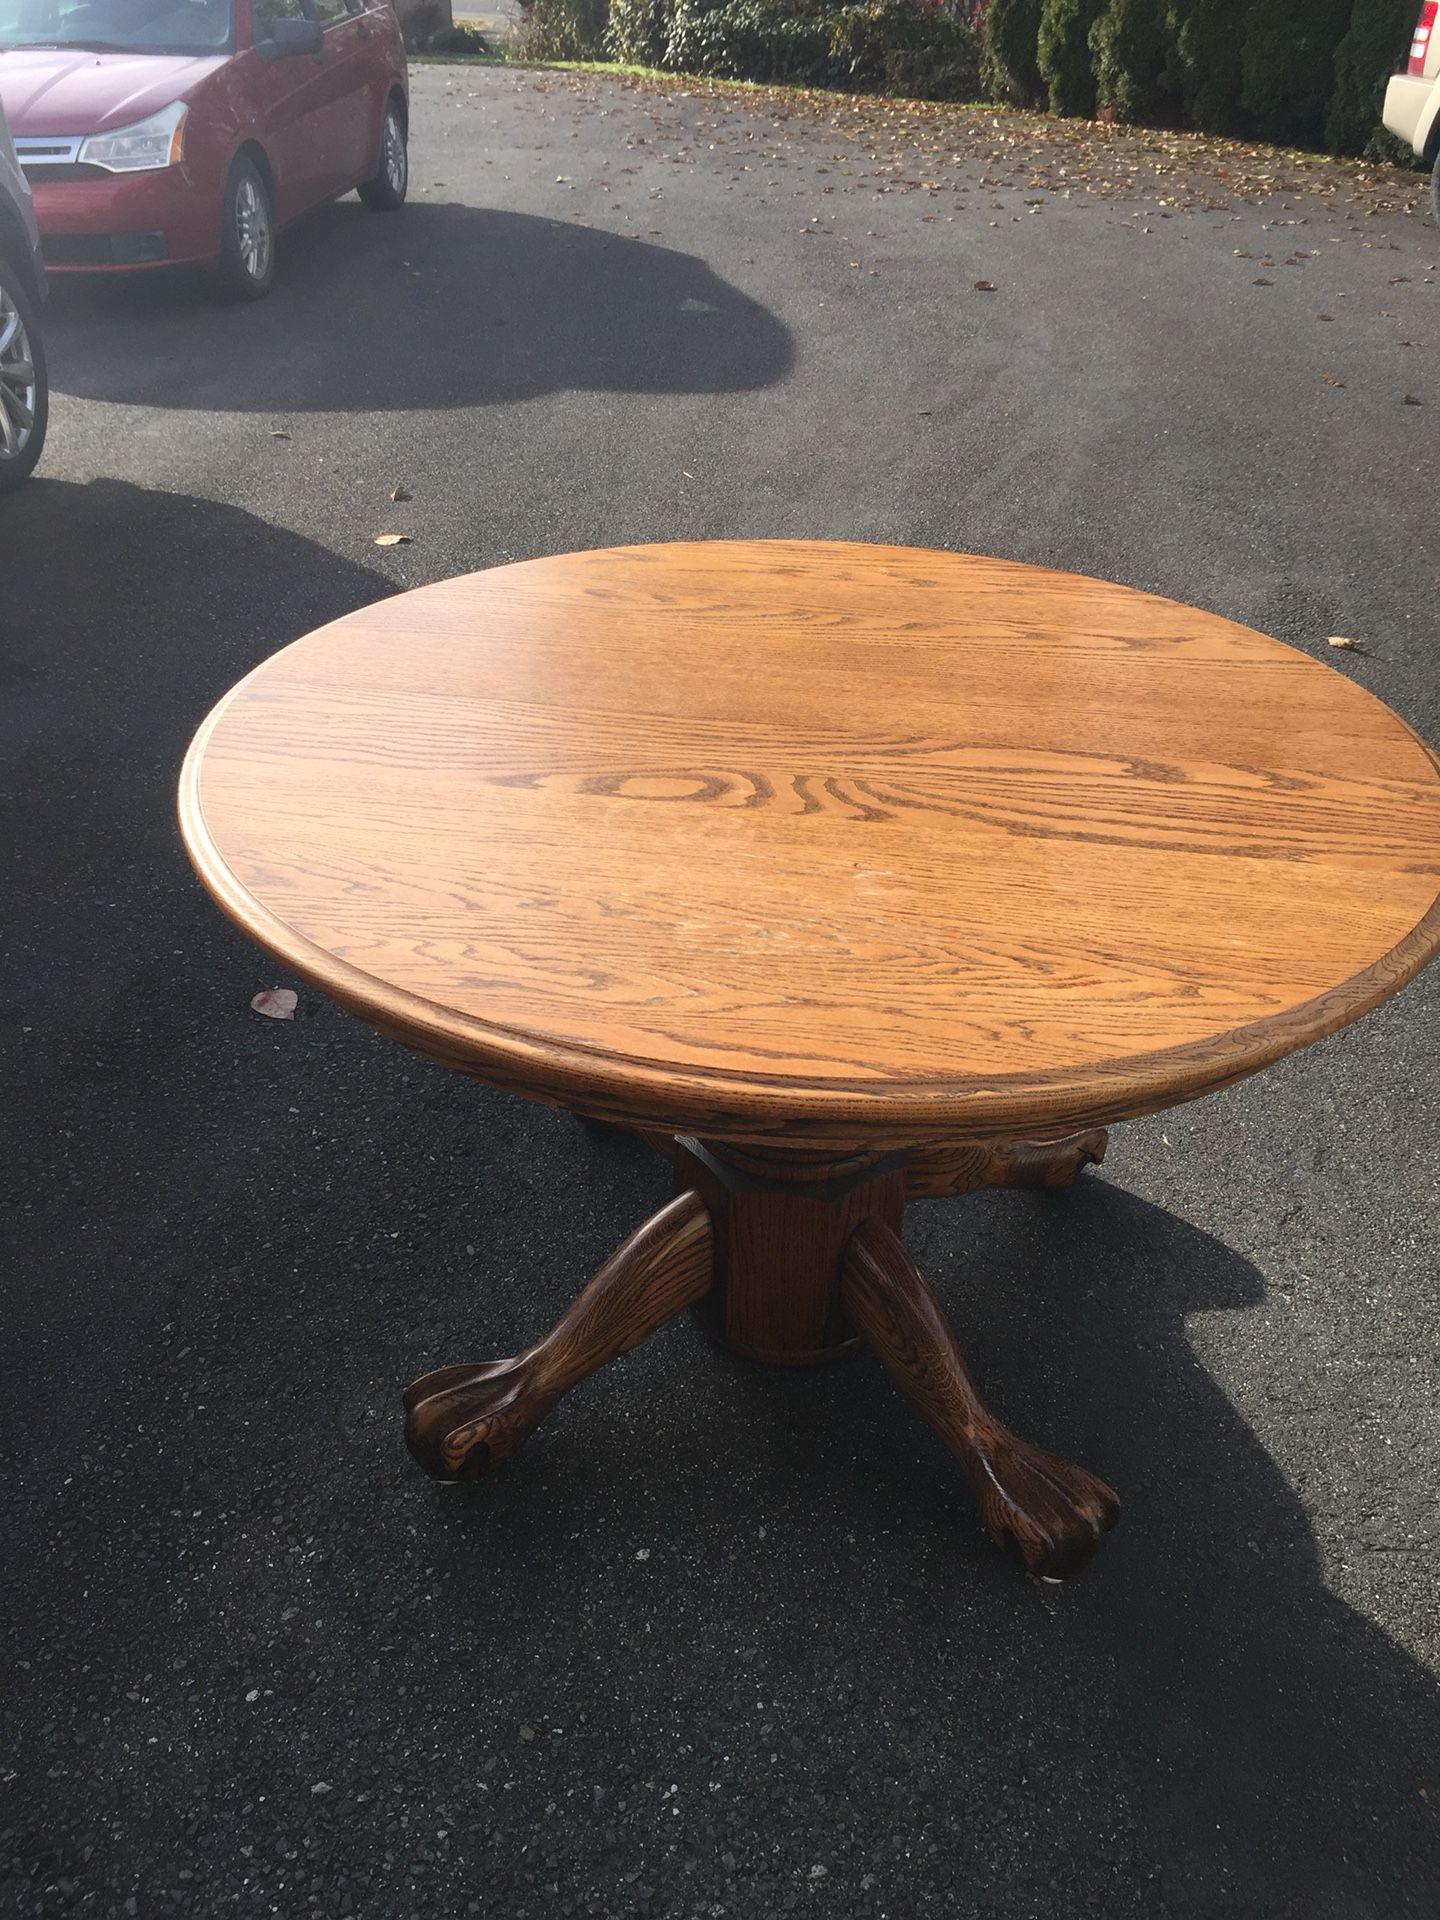 Solid oak dining table seats up to at least 10. 3 leaves